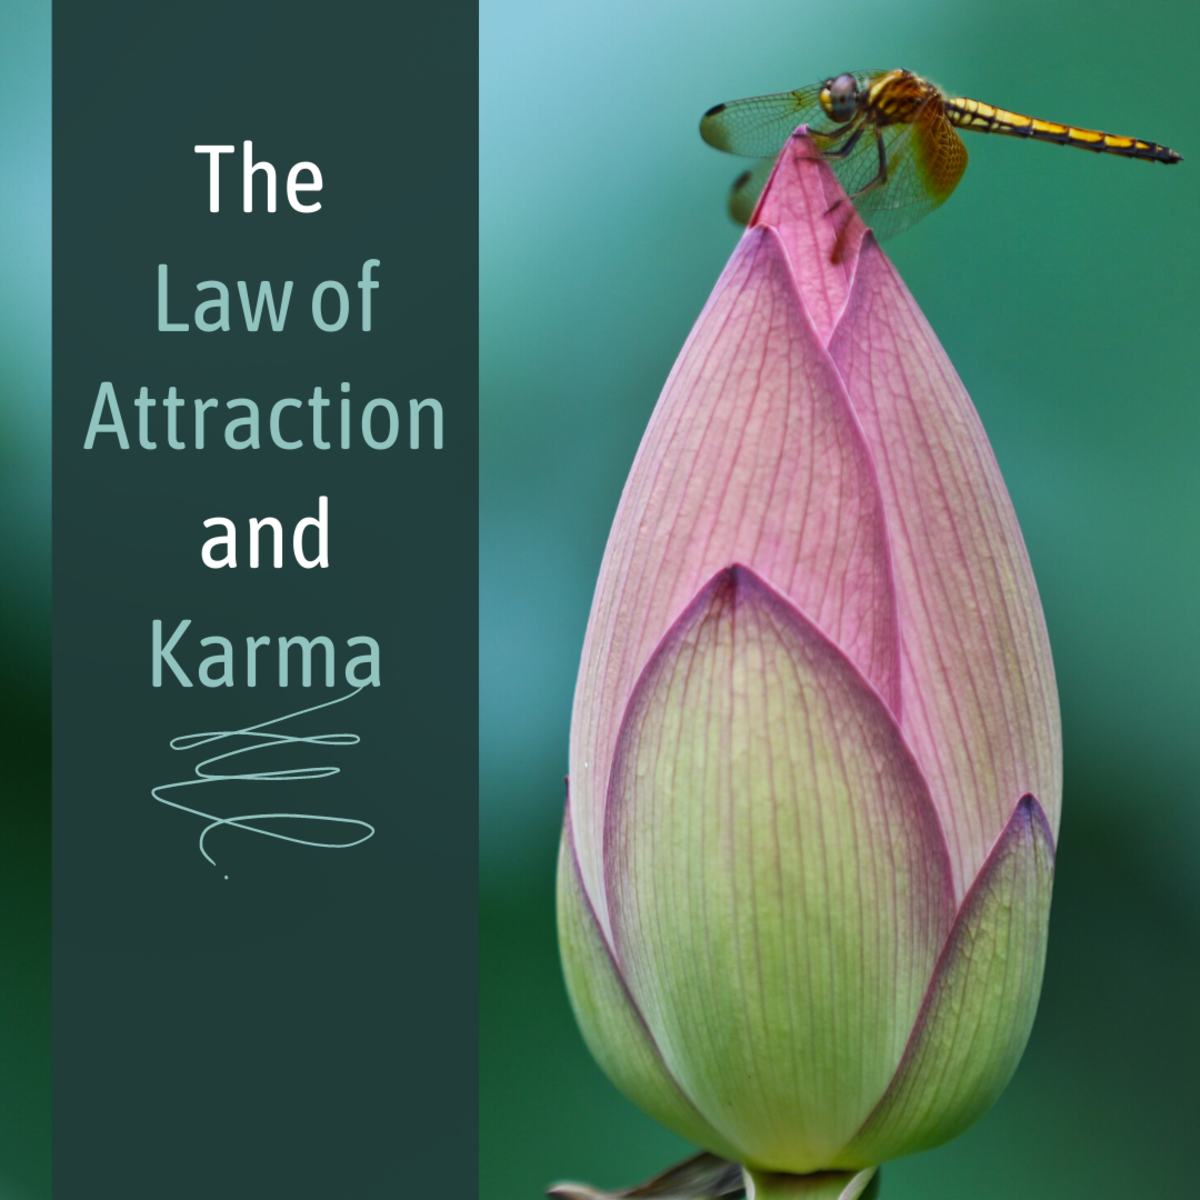 The Missing Karmic Link to the Law of Attraction